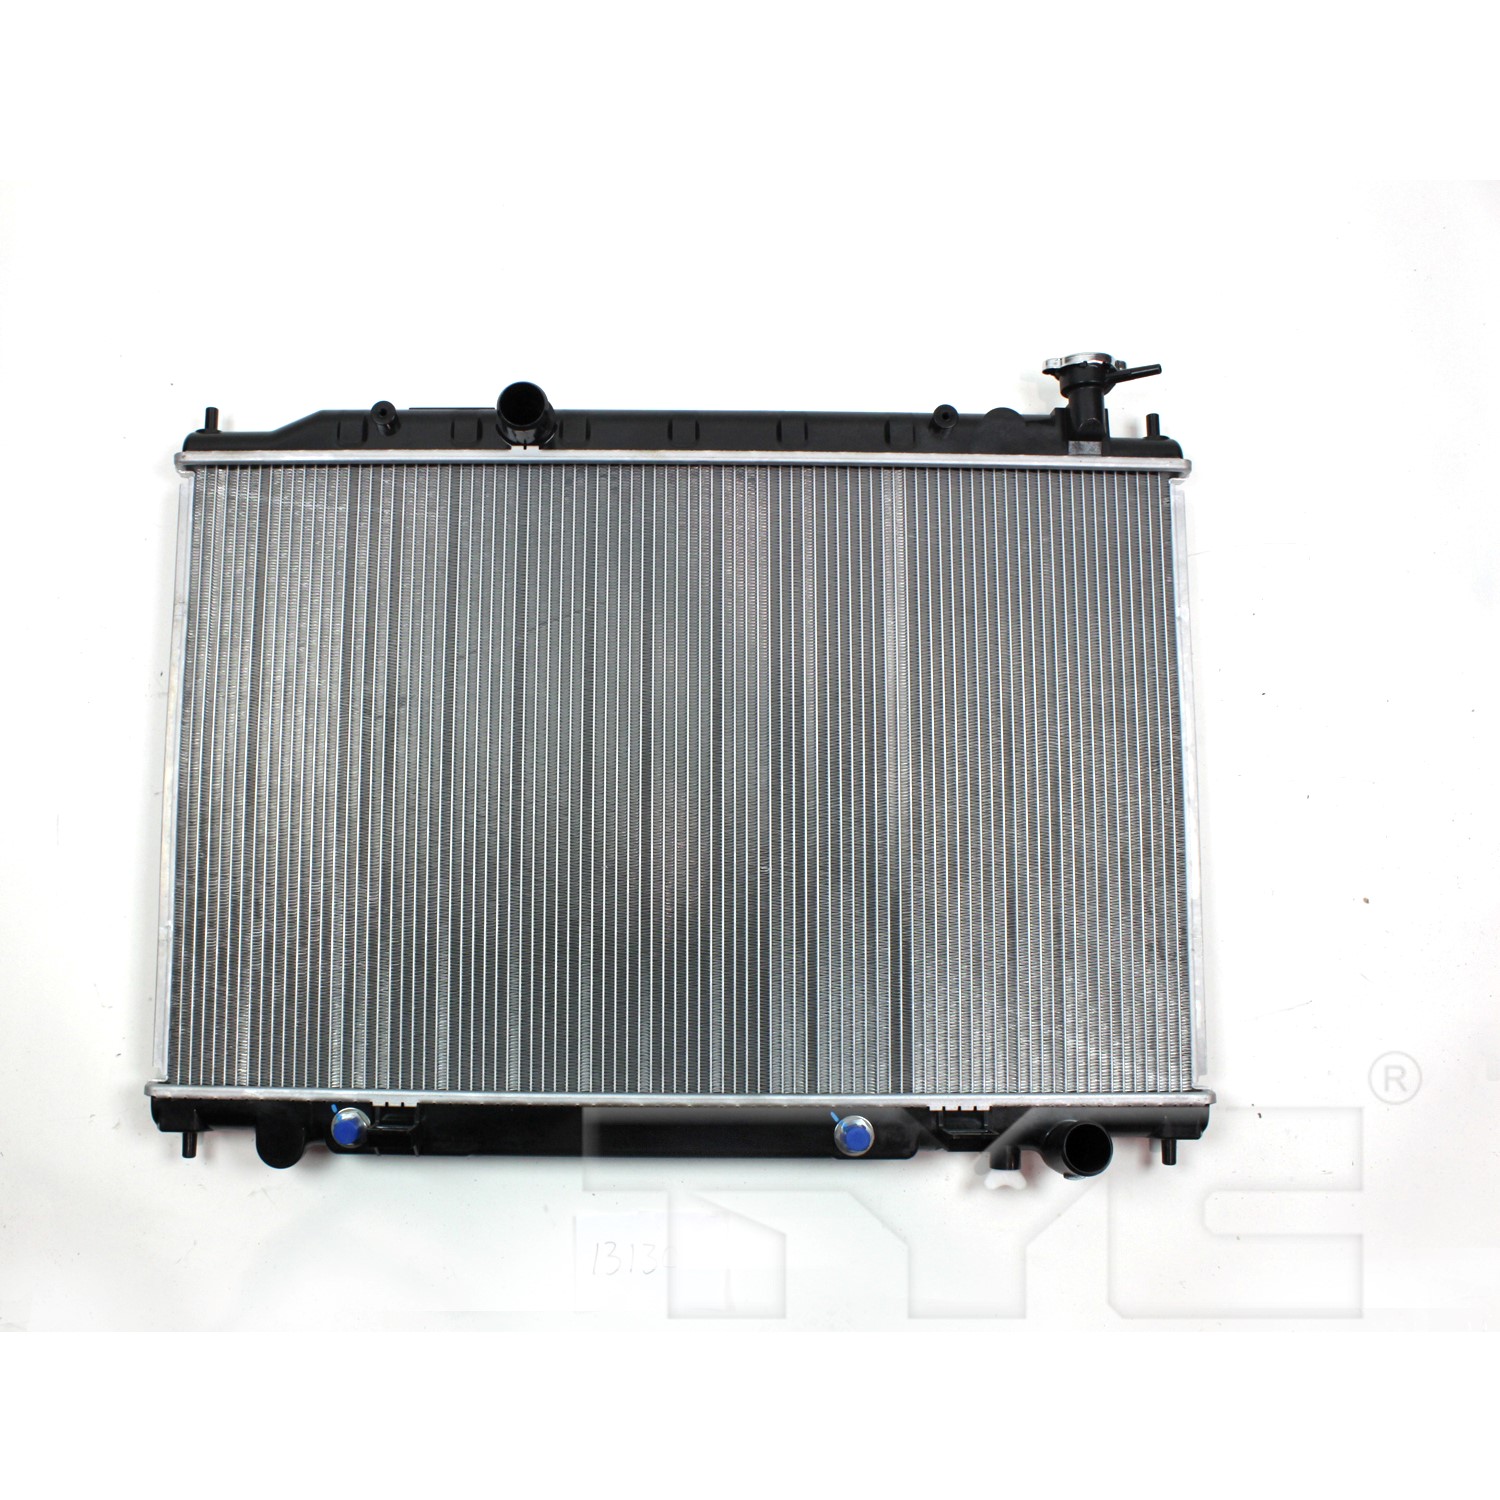 Aftermarket RADIATORS for NISSAN - QUEST, QUEST,04-09,Radiator assembly